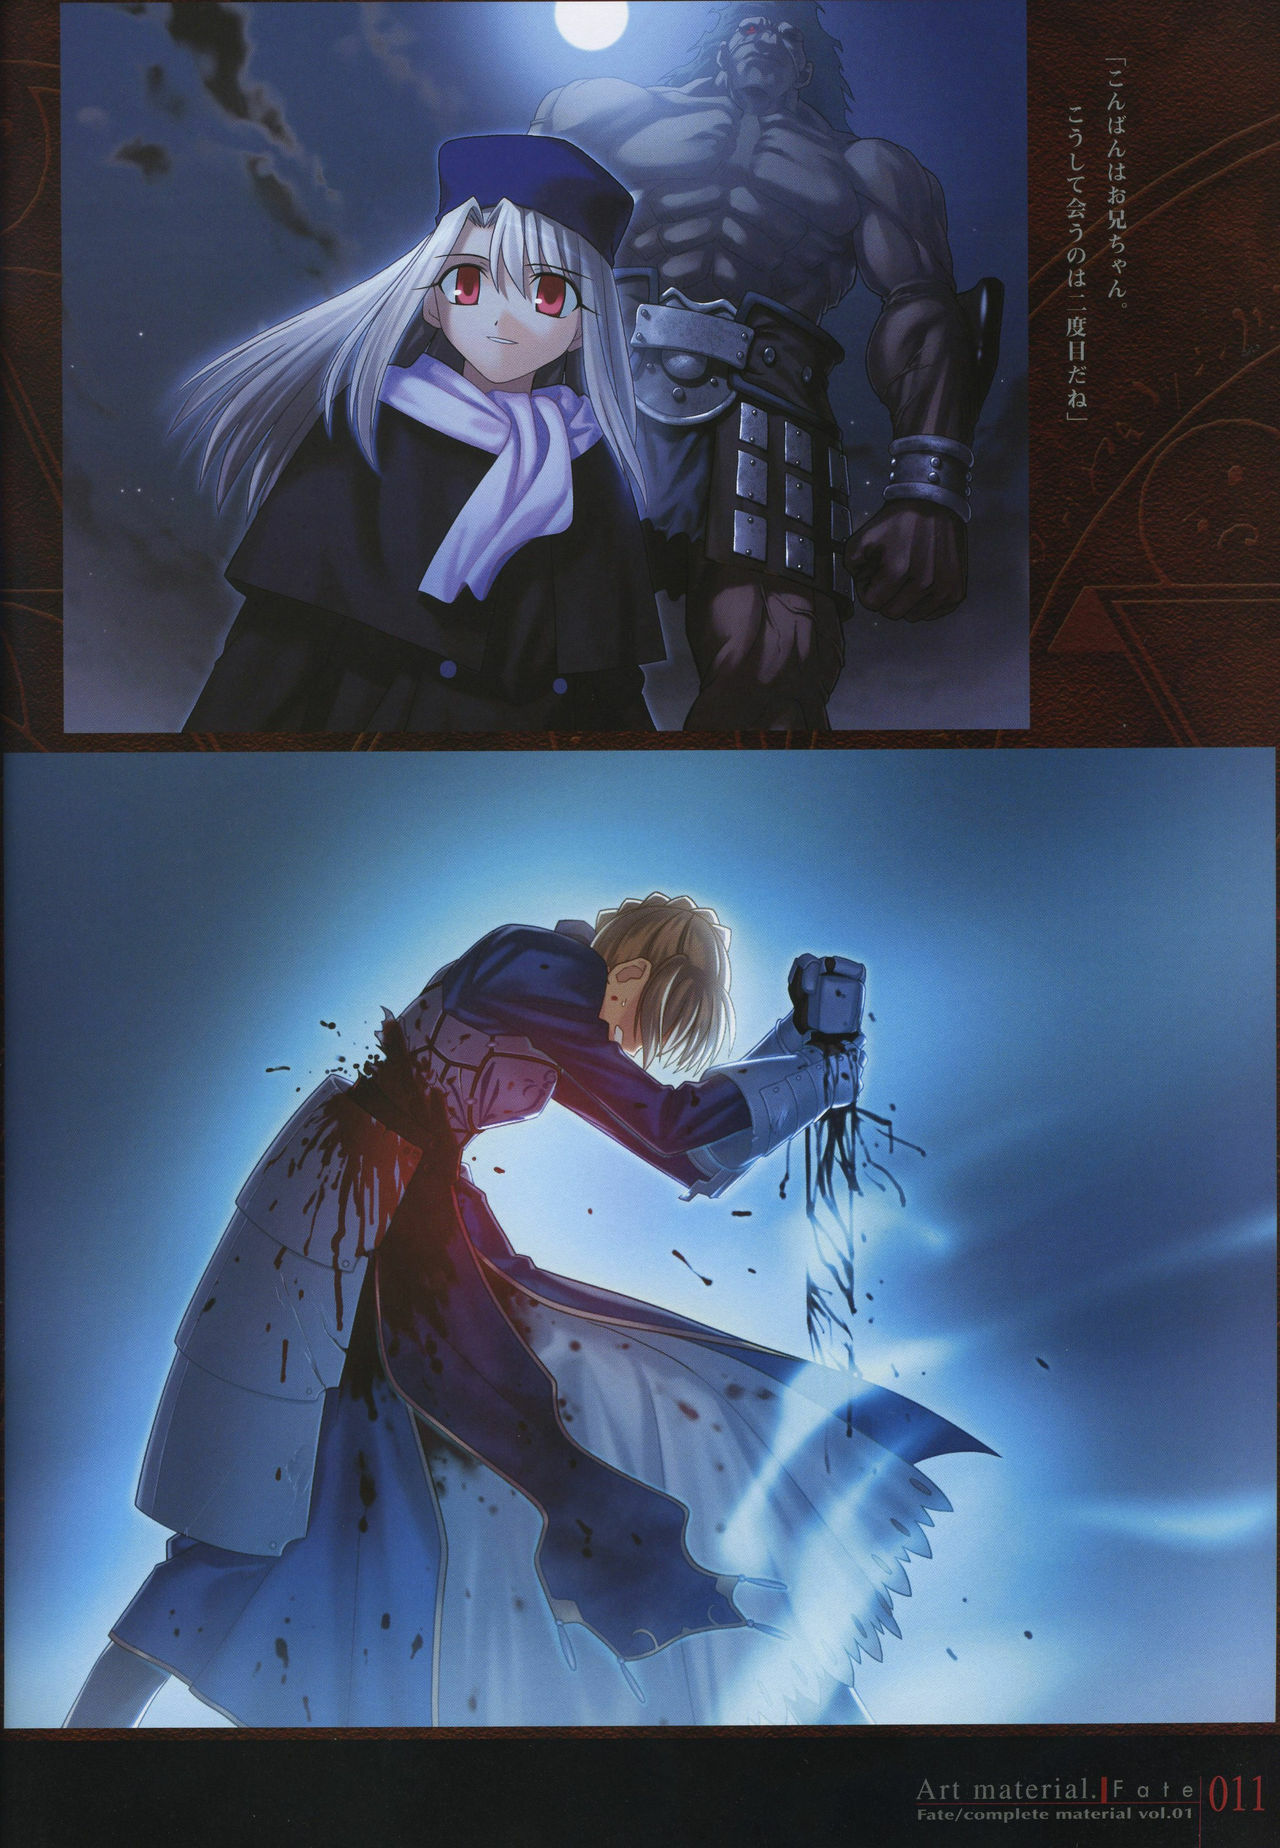 [Type-Moon] Fate/complete material I - Art material. page 16 full